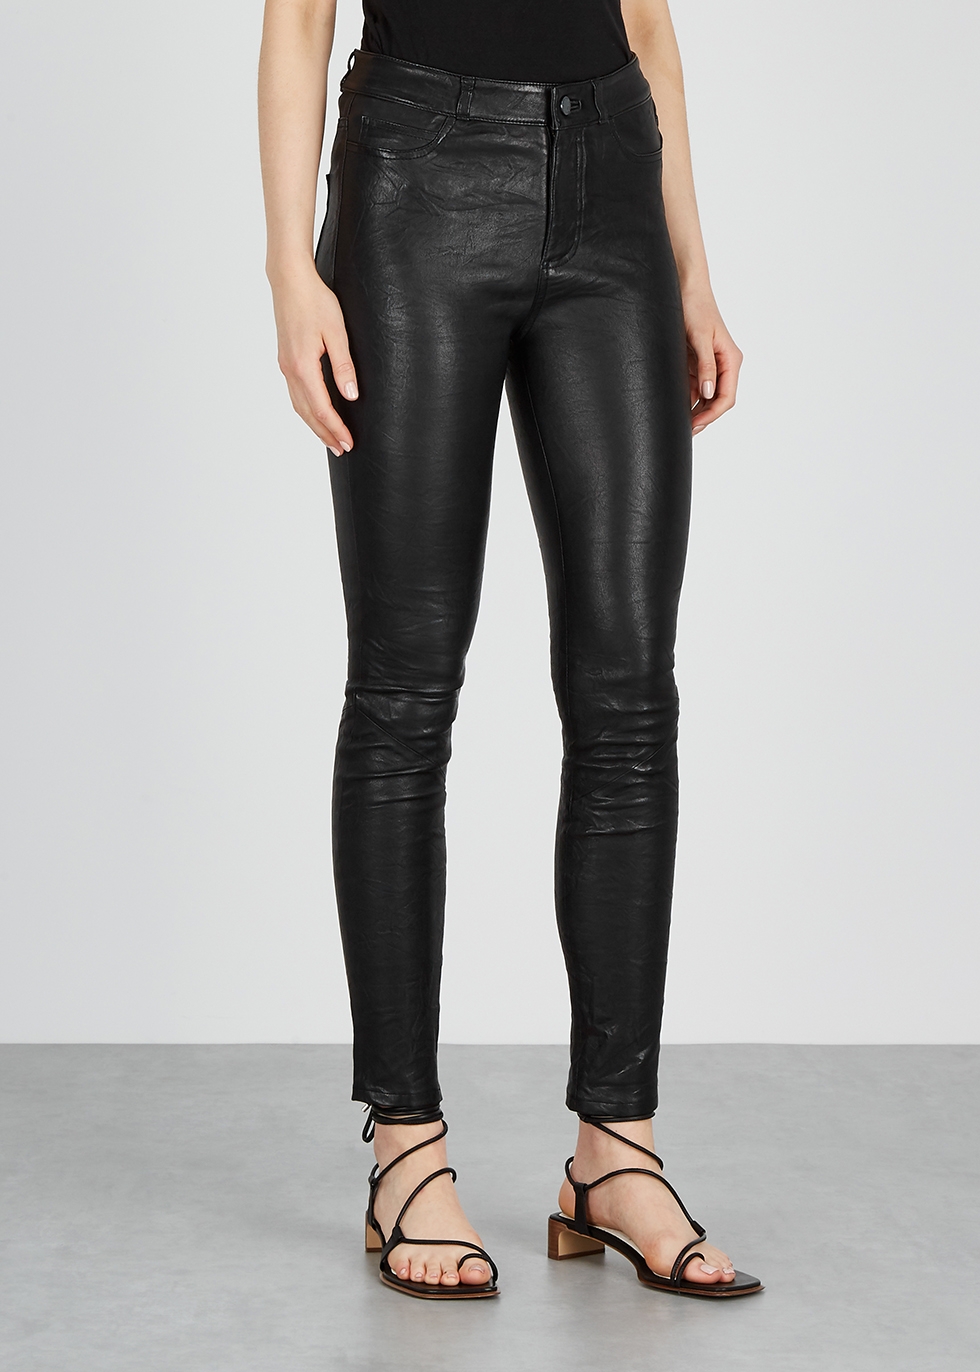 paige leather jeans